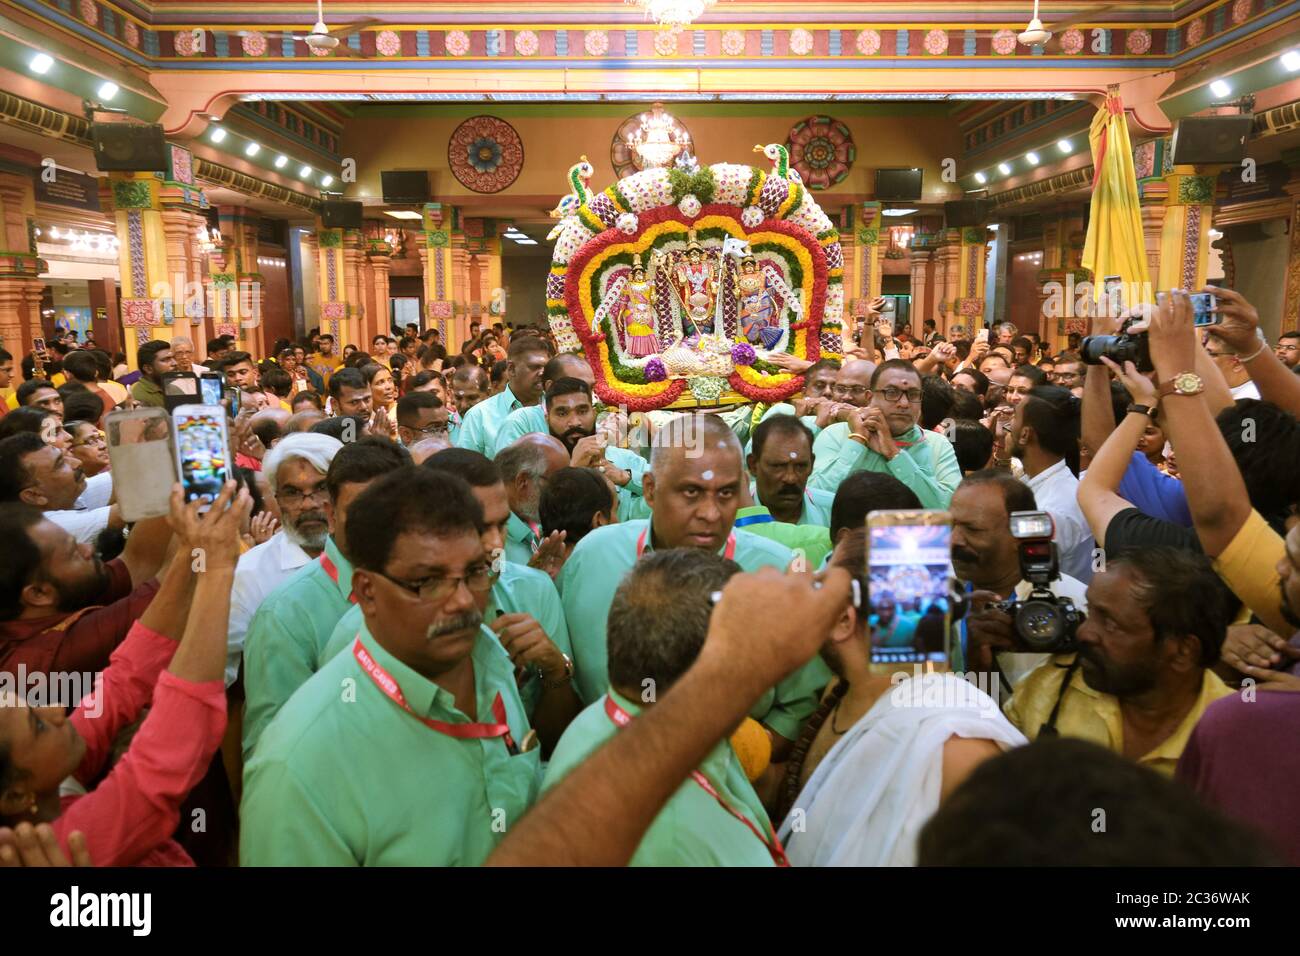 Crowd gather at Sri Maha Mariamman Temple, Kuala Lumpur, Malaysia to witness the initiation of Thaipusam chariot procession. Stock Photo